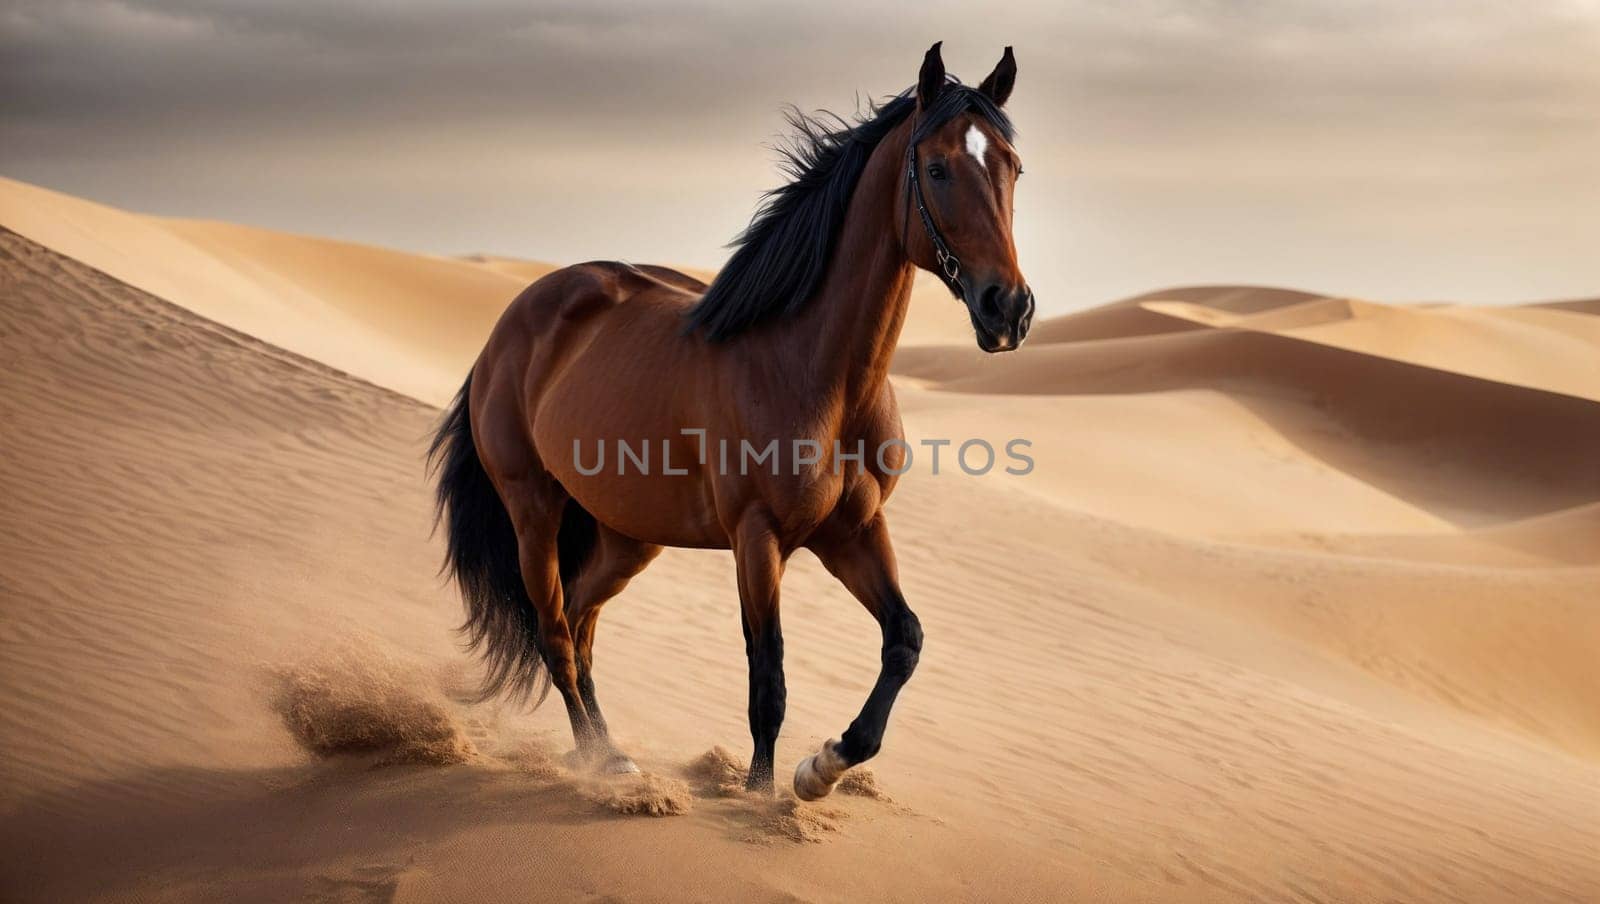 A powerful horse galloping across the sandy terrain of the dunes, leaving a trail of dust in its wake.